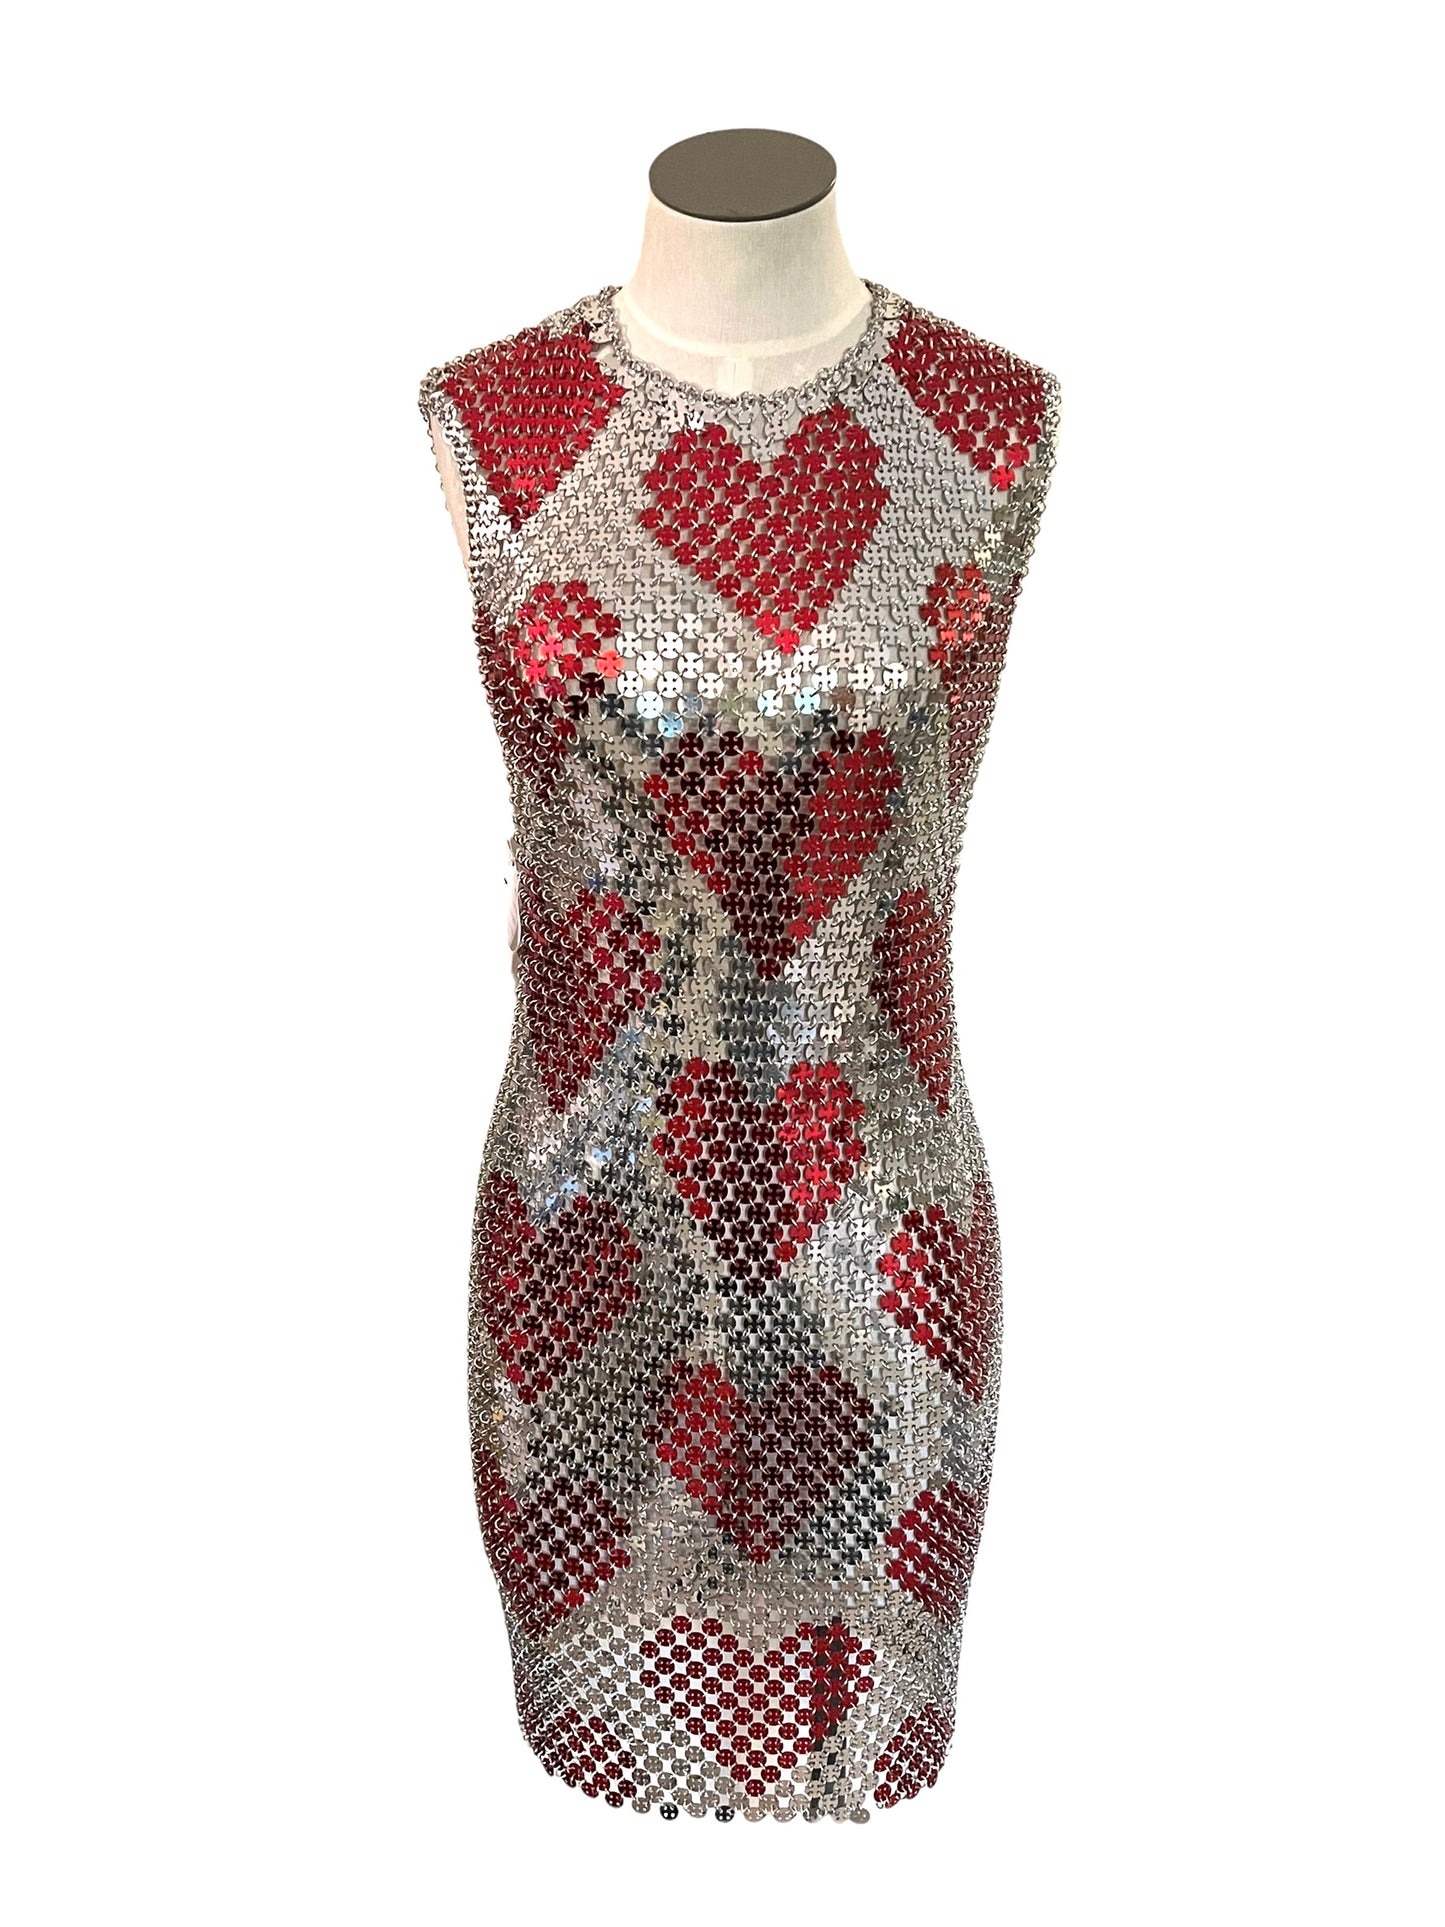 Paco Rabanne Size 42 Silver & Red Chainmail Heart Dress